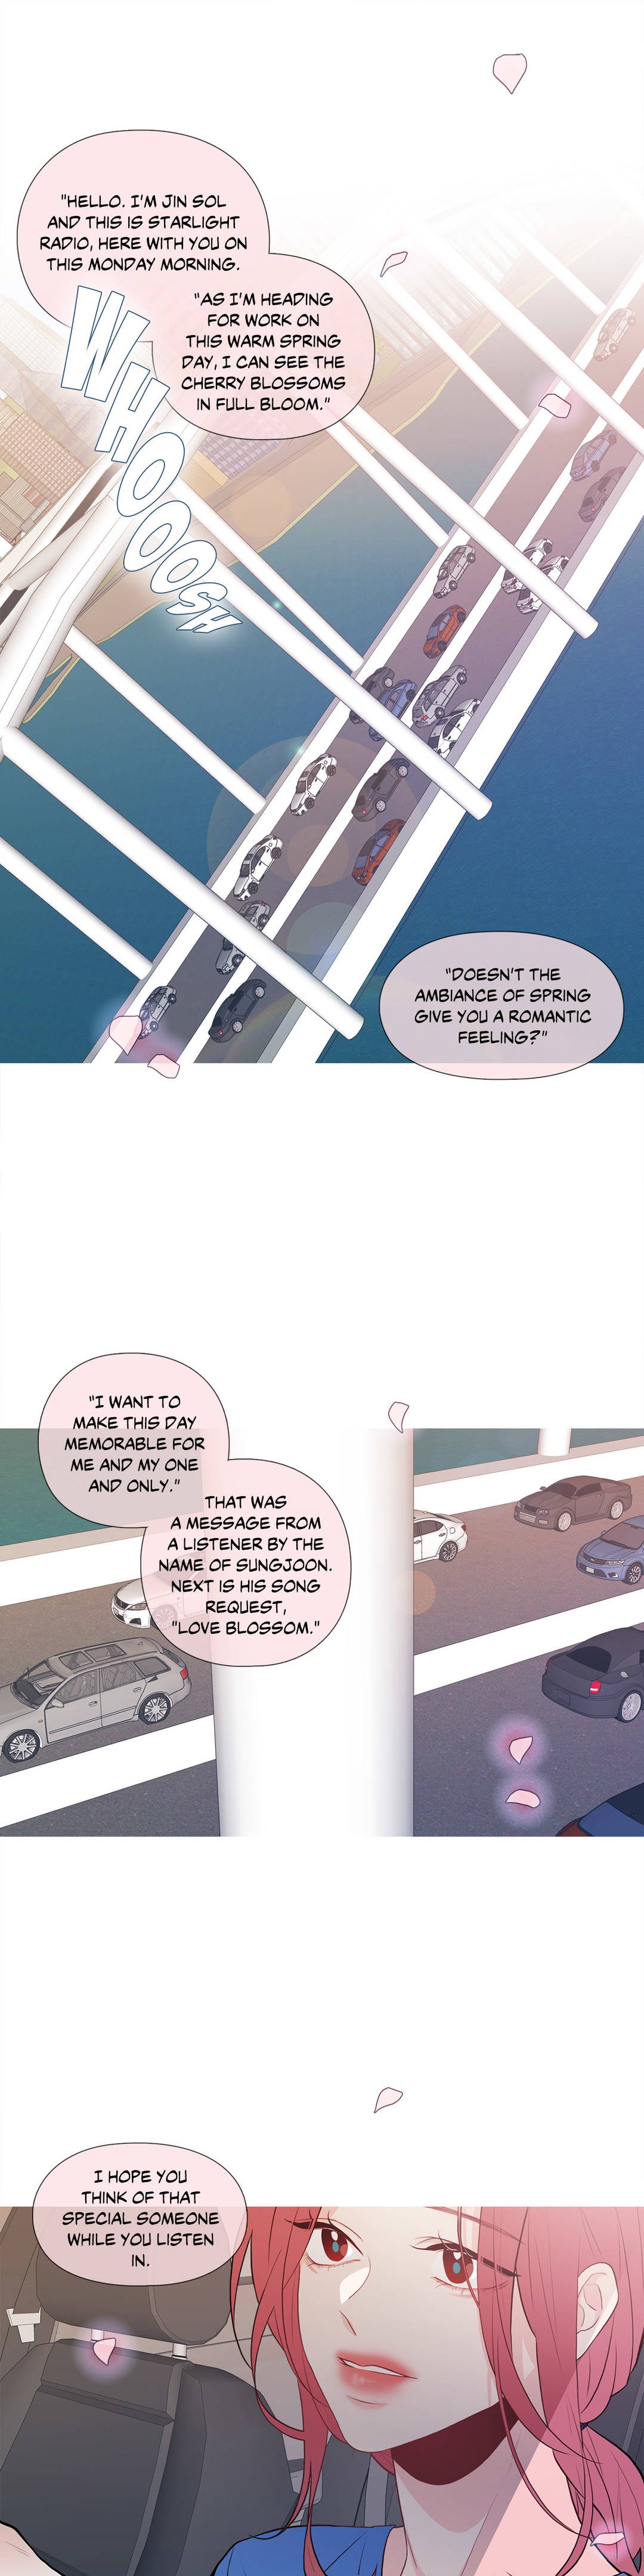 Two Birds in Spring - Chapter 1 Page 20